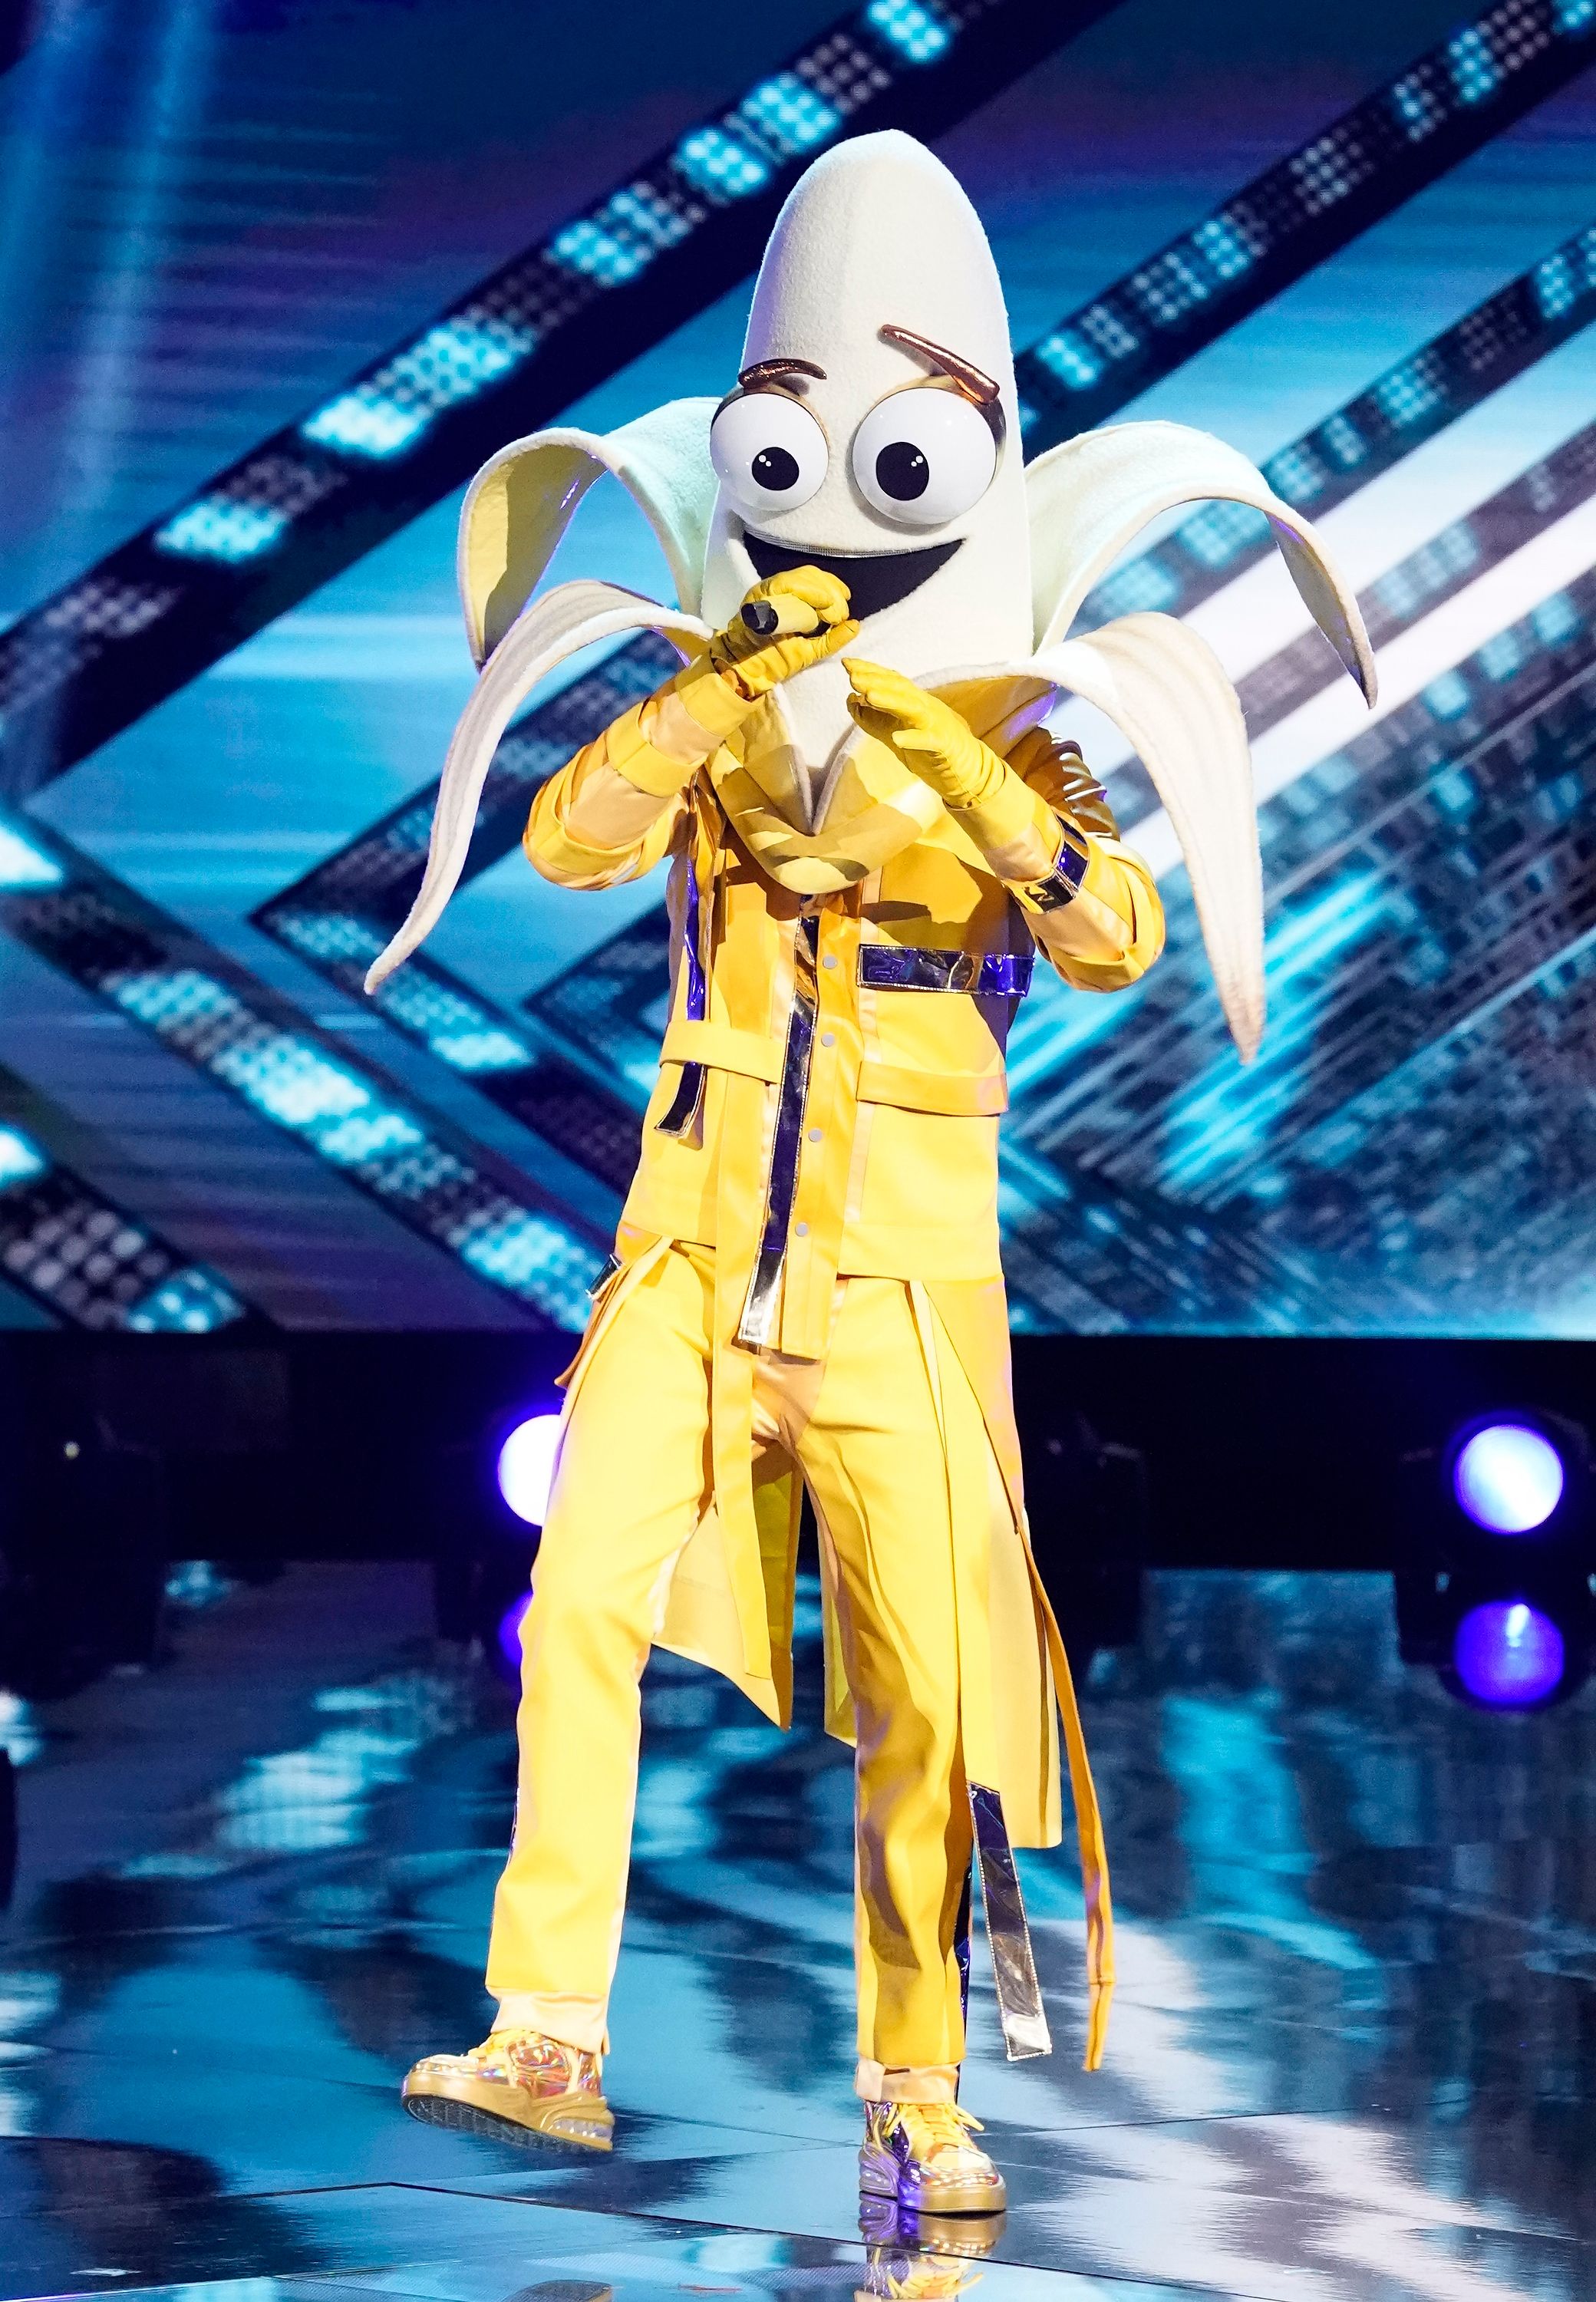 Banana 'The Masked Singer'? — Clues and Guesses